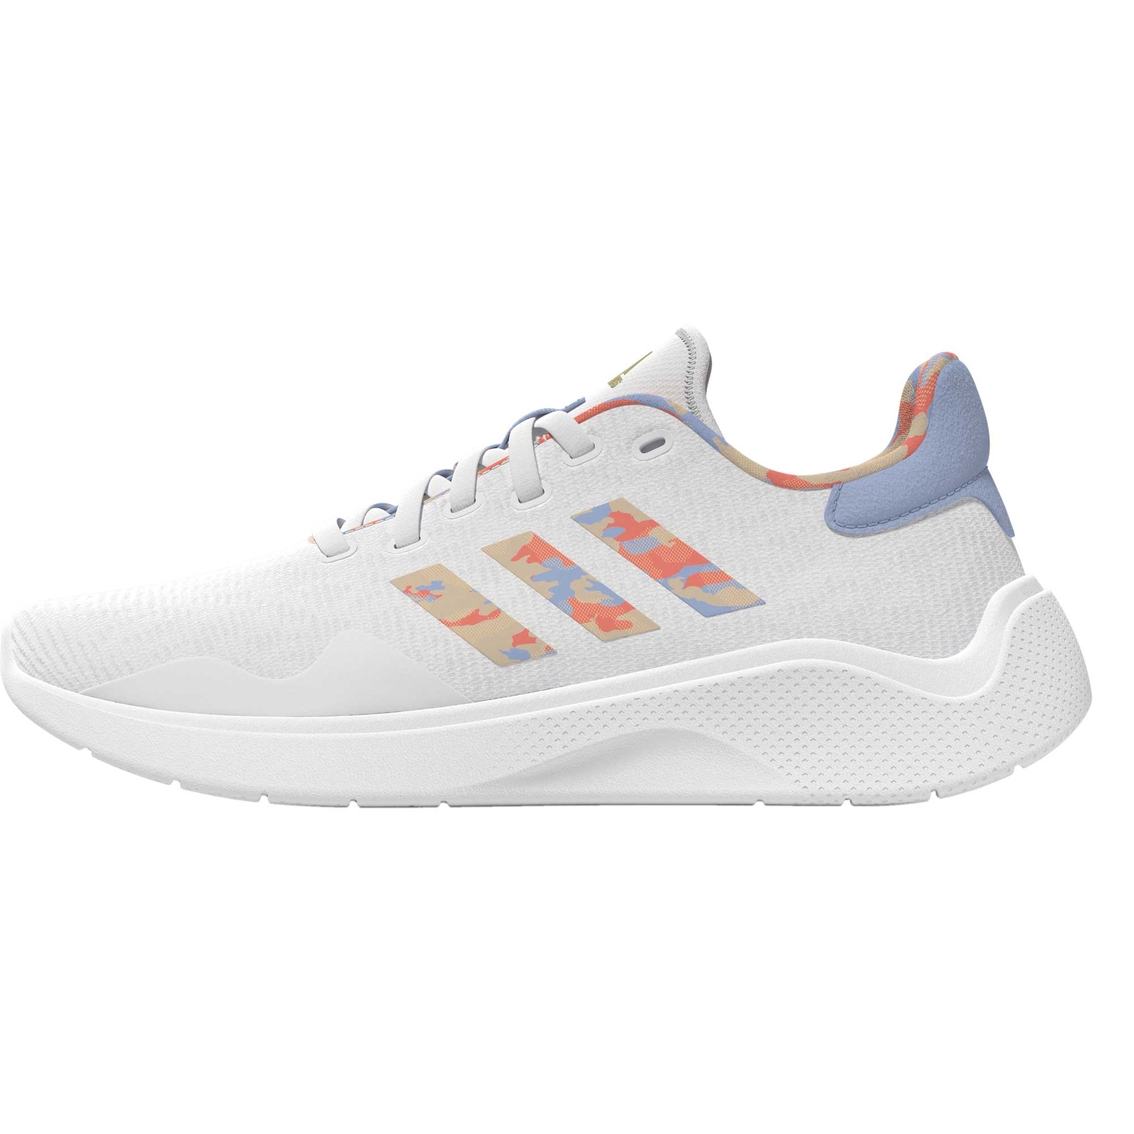 Adidas Women's Puremotion 2.0 Sneakers - Image 2 of 10